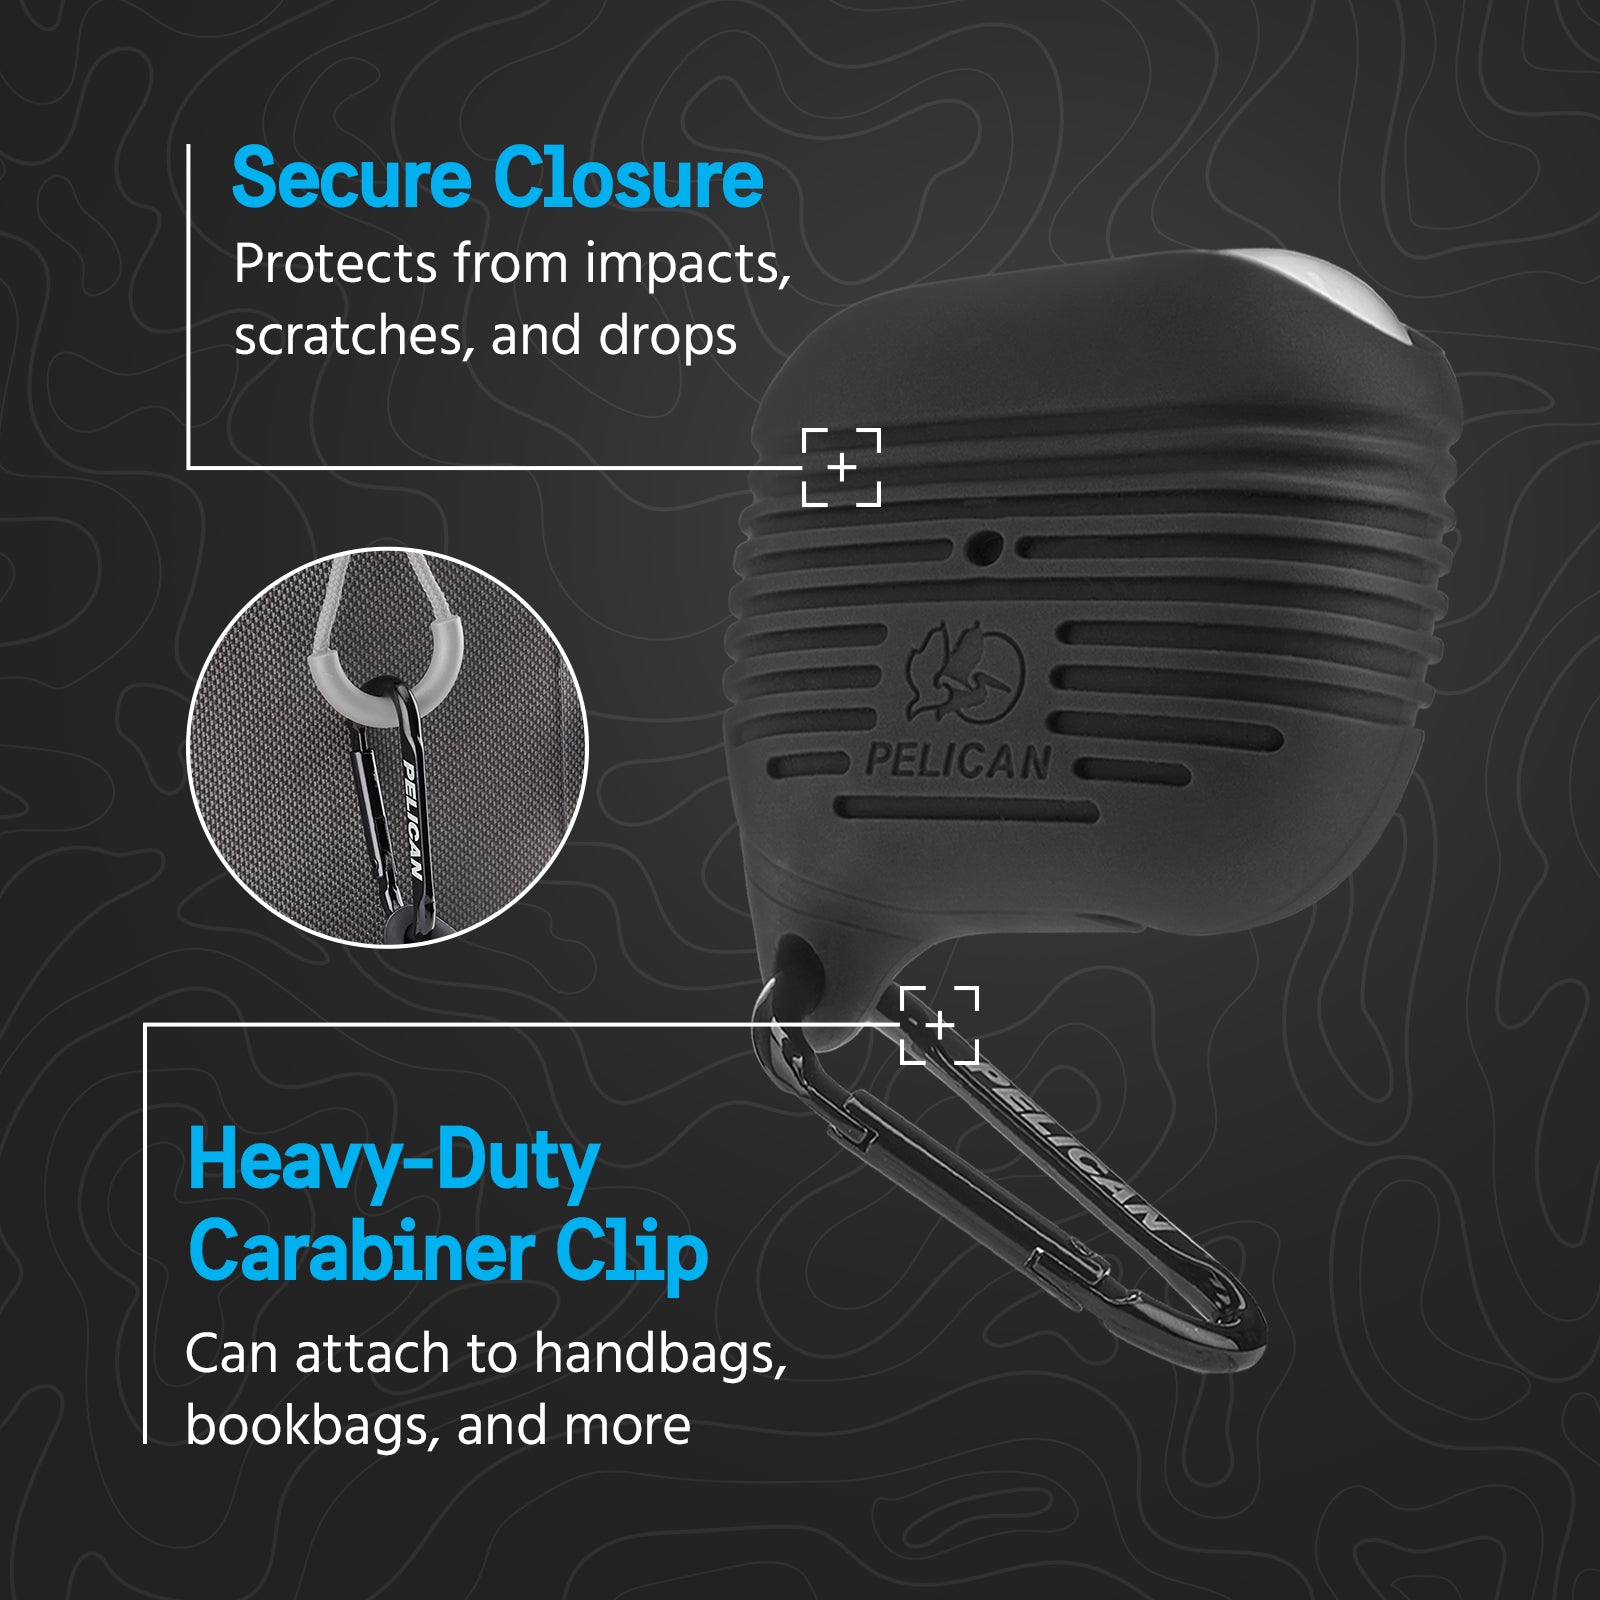 SECURE CLOSURE PROTECTS FROM IMPACTS, SCRATCHES, AND DROPS. HEAVY DUTY CRABINER CLIP CAN ATTACH TO HANDBAGS, BOOKBAGS, AND MORE.